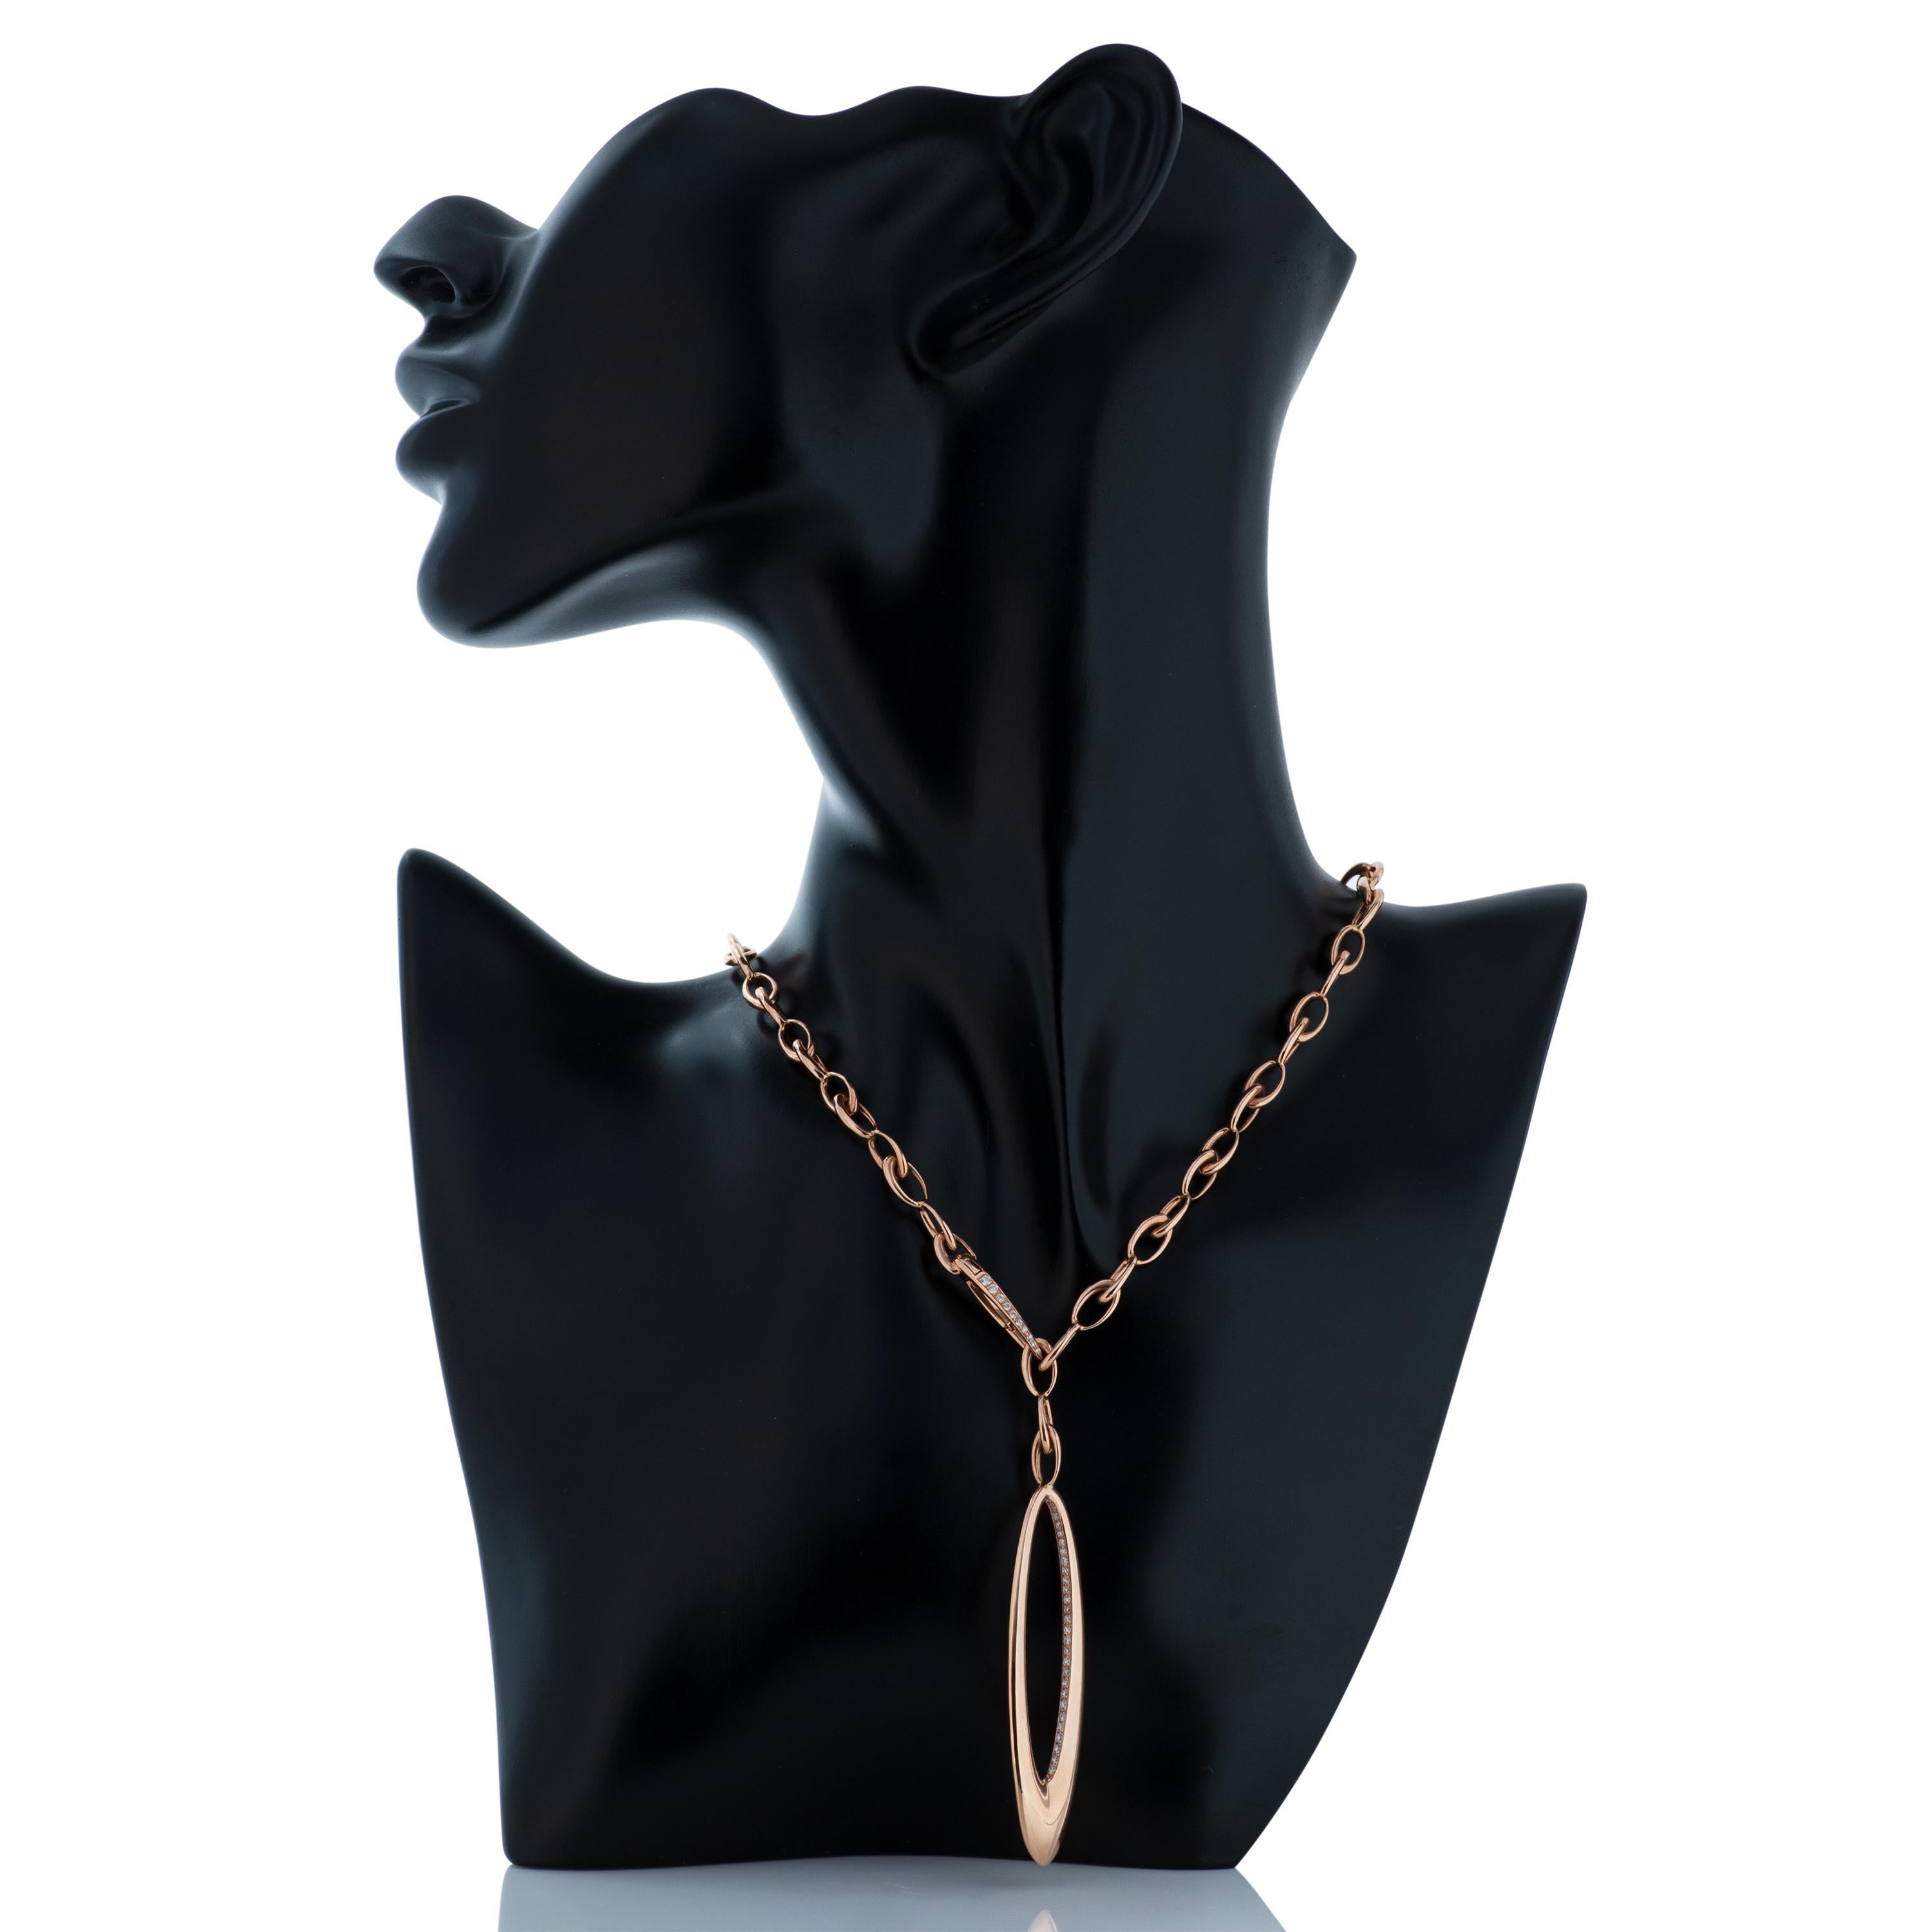 Gubelin 18 karat rose gold adjustable length chain necklace with diamond pendant and clasp.
The necklace contains approximately 0.70 carat of round diamonds with estimated G-H color and VS clarity.  
50.54 grams total.  
The necklace is adjustable